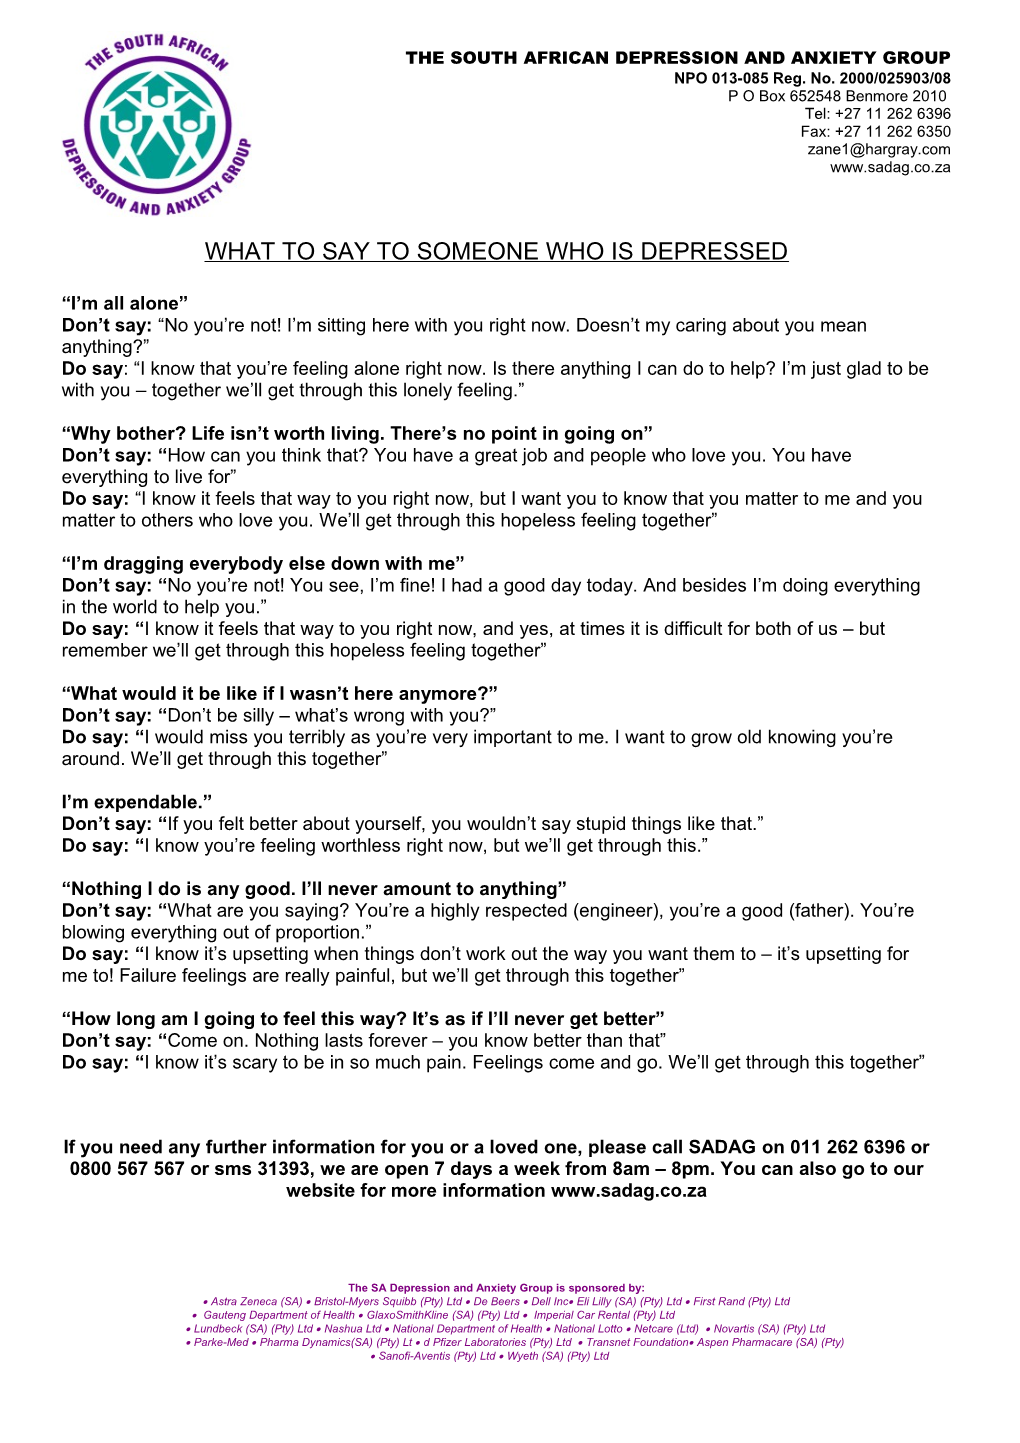 What to Say to Someone Who Is Depressed